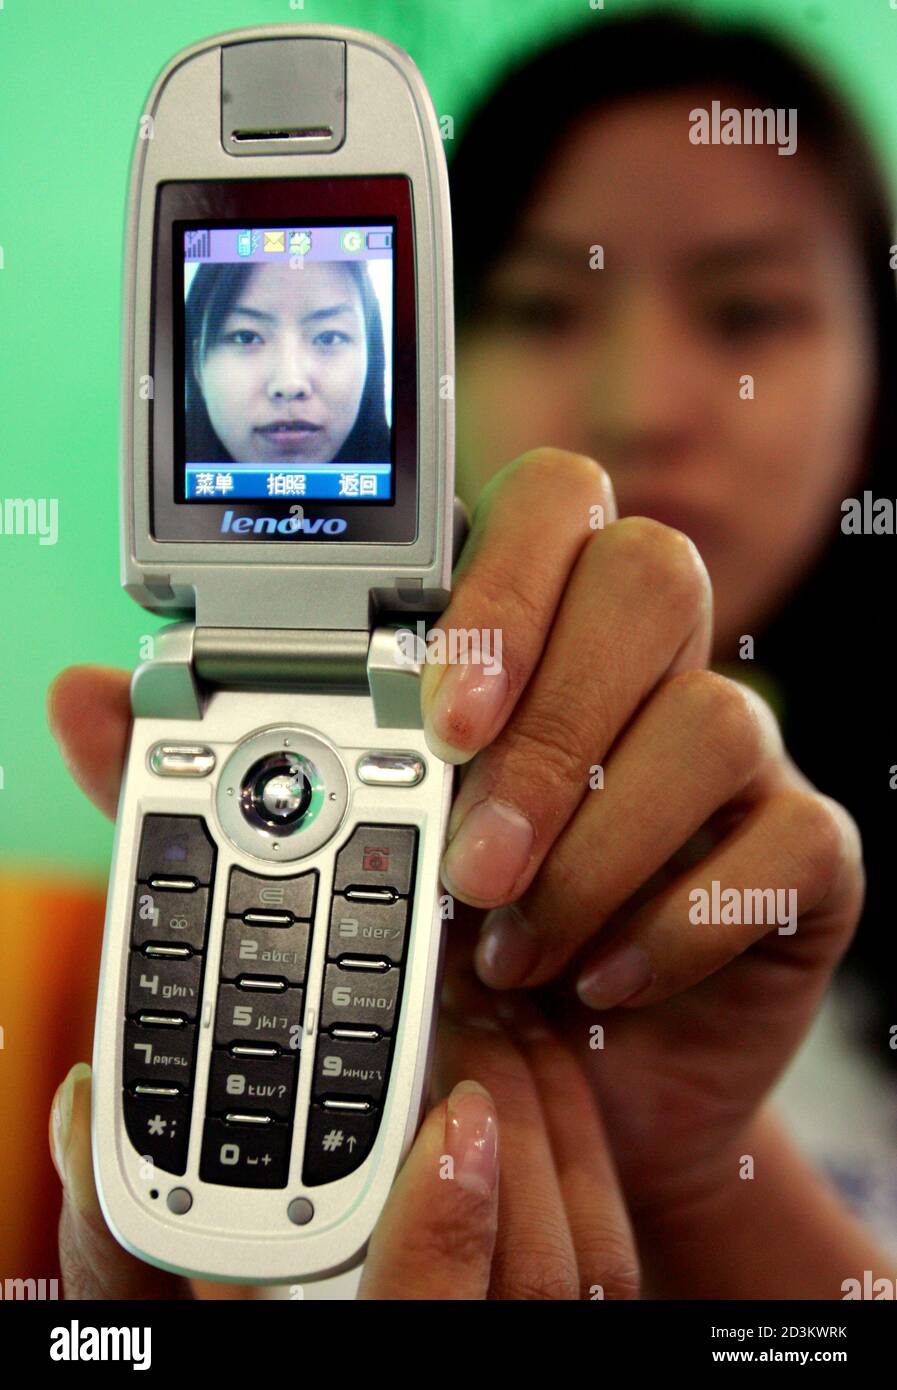 Trademark playground Tariff A Chinese model shows a new Chinese mobile phone model at a telecoms expo  in Beijing October 29, 2004. China is the world's largest telecoms market,  with more than 315 million mobile